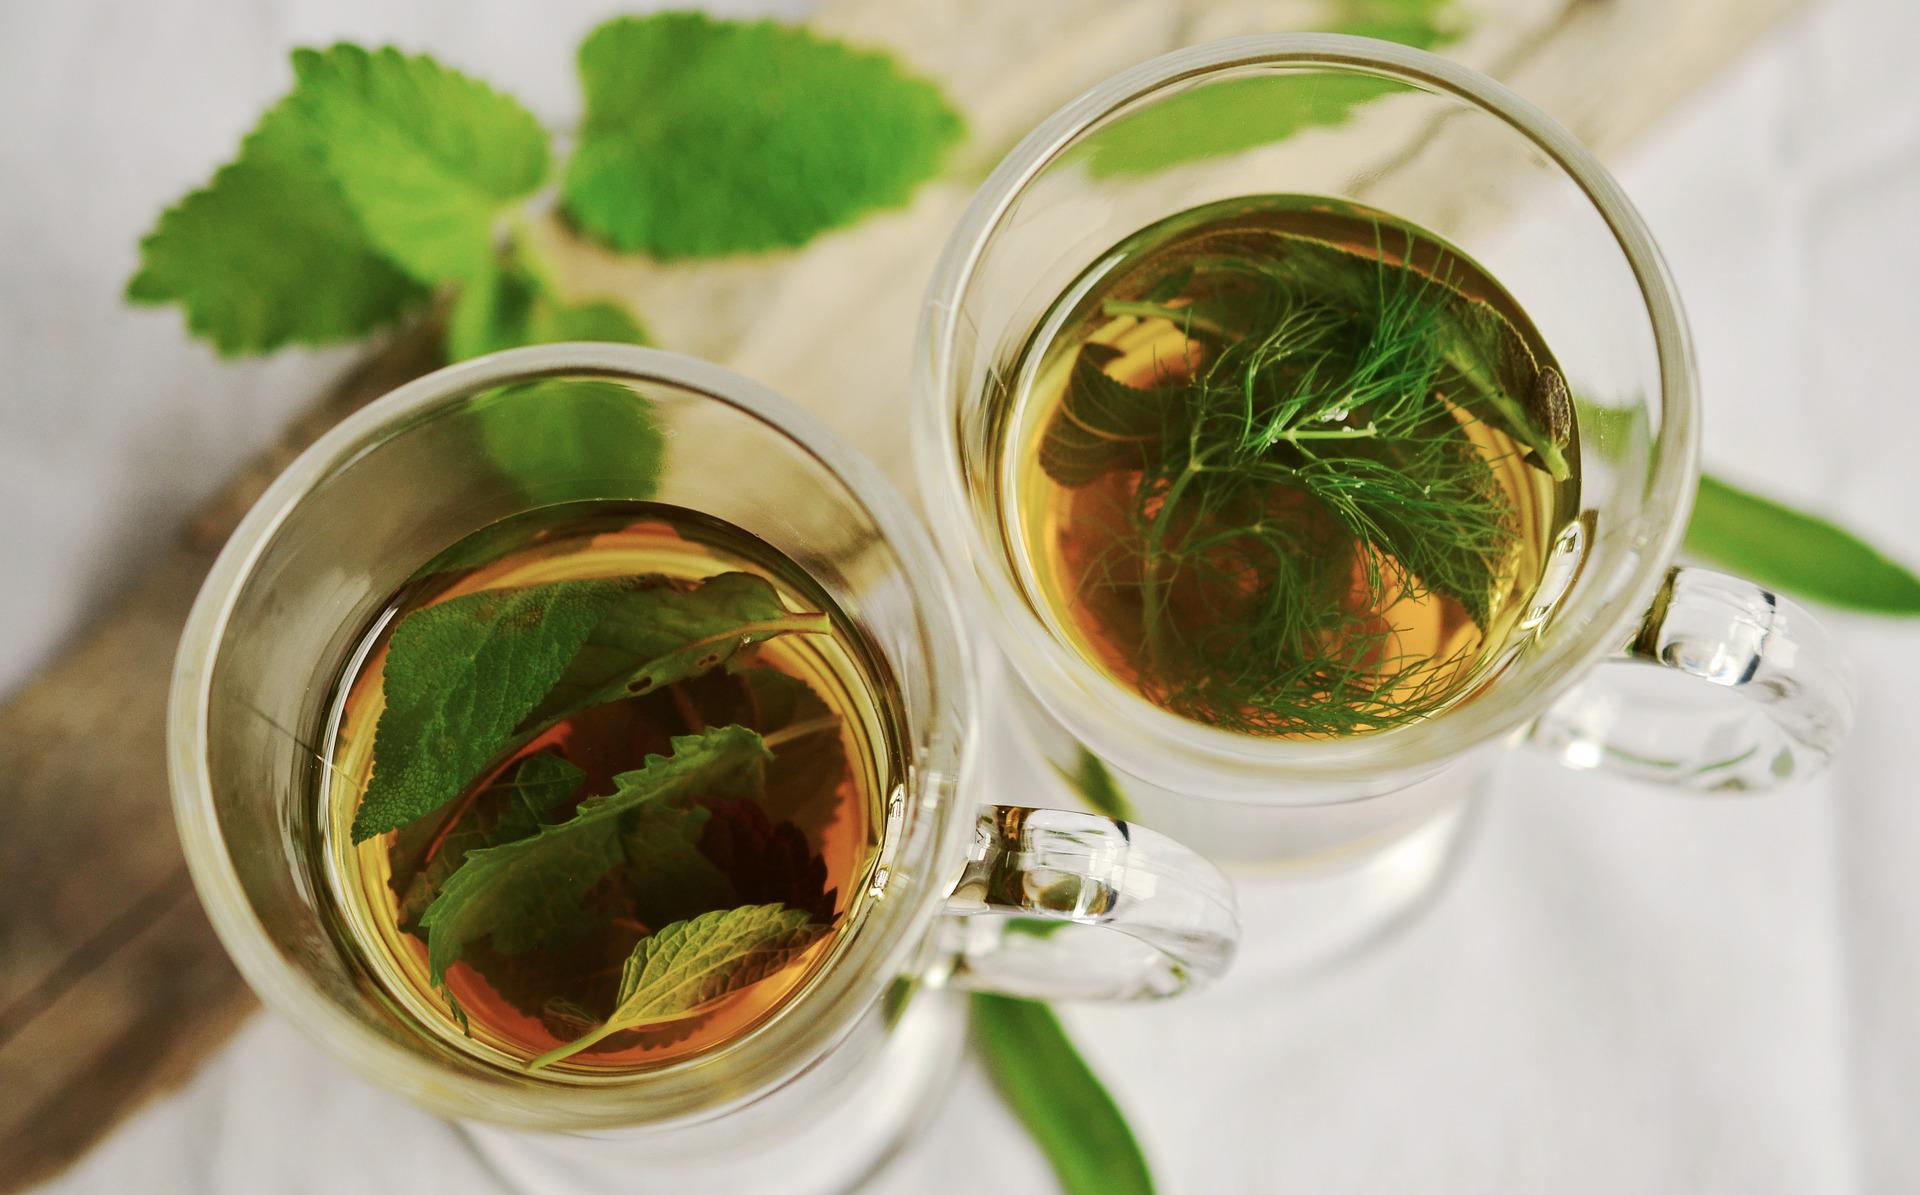 Homemade teas can help the process, but they won't work alone (Source: Pixabay/congerdesign)